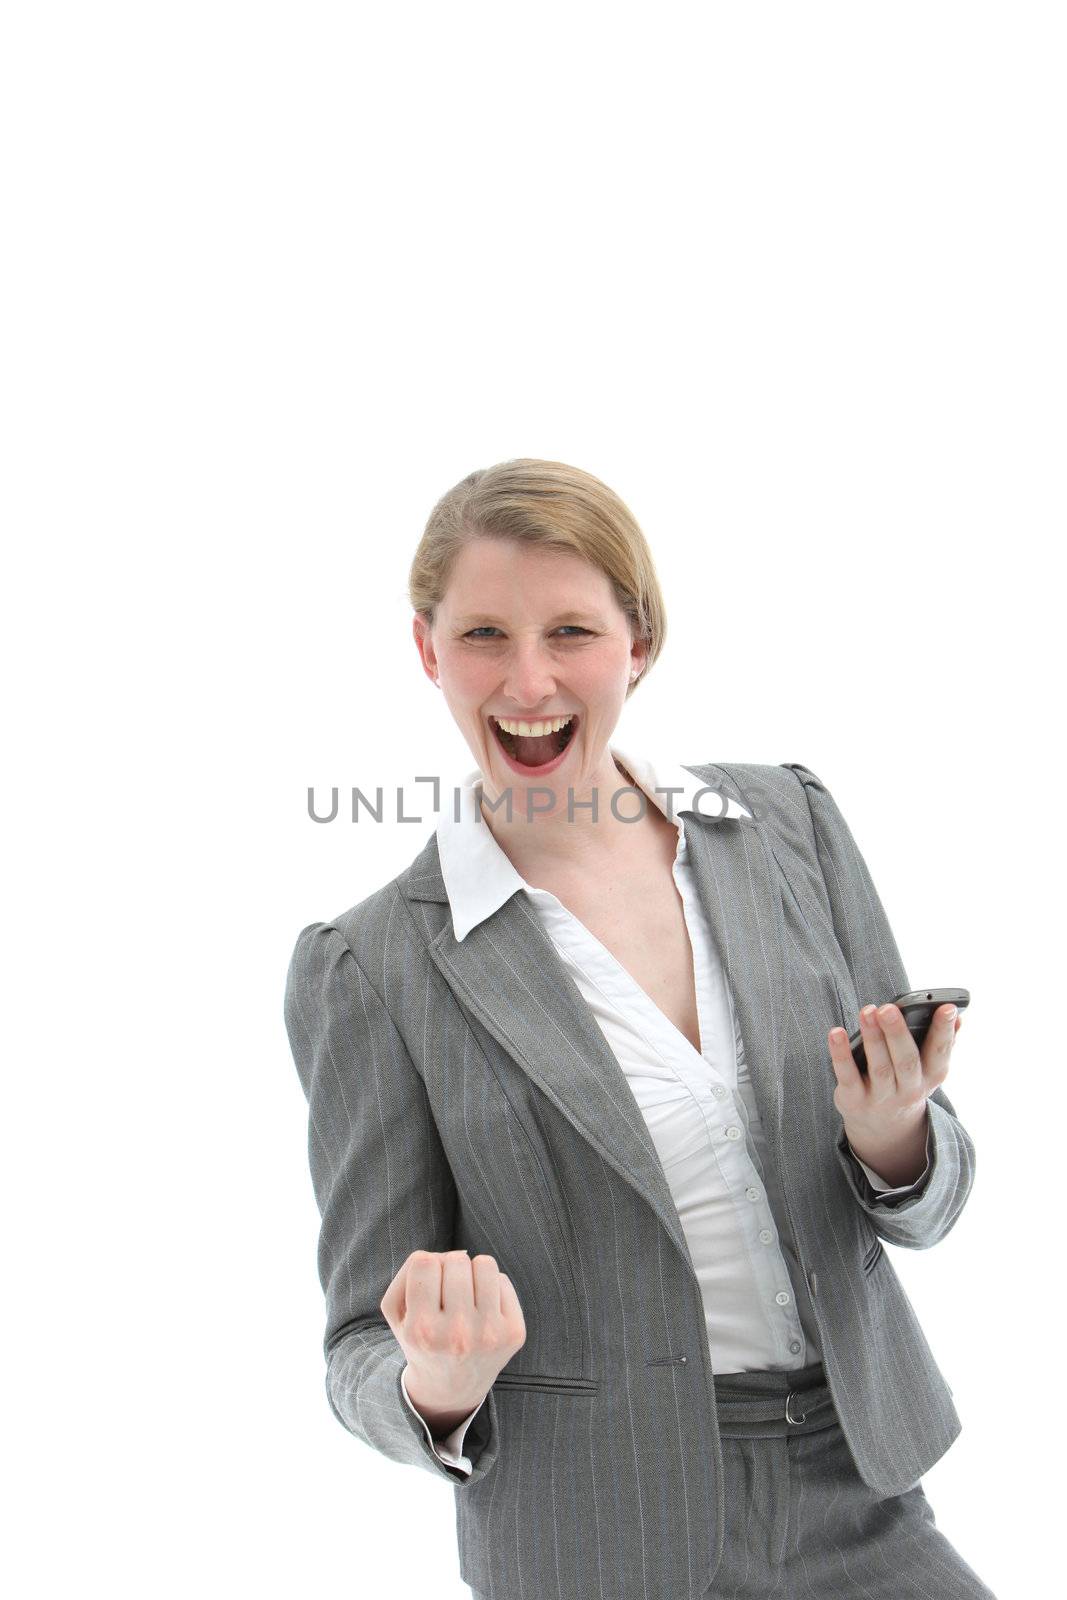 Woman laughing and punching the air with her fist after receiving good news on her mobile phone which she is holding in her hand